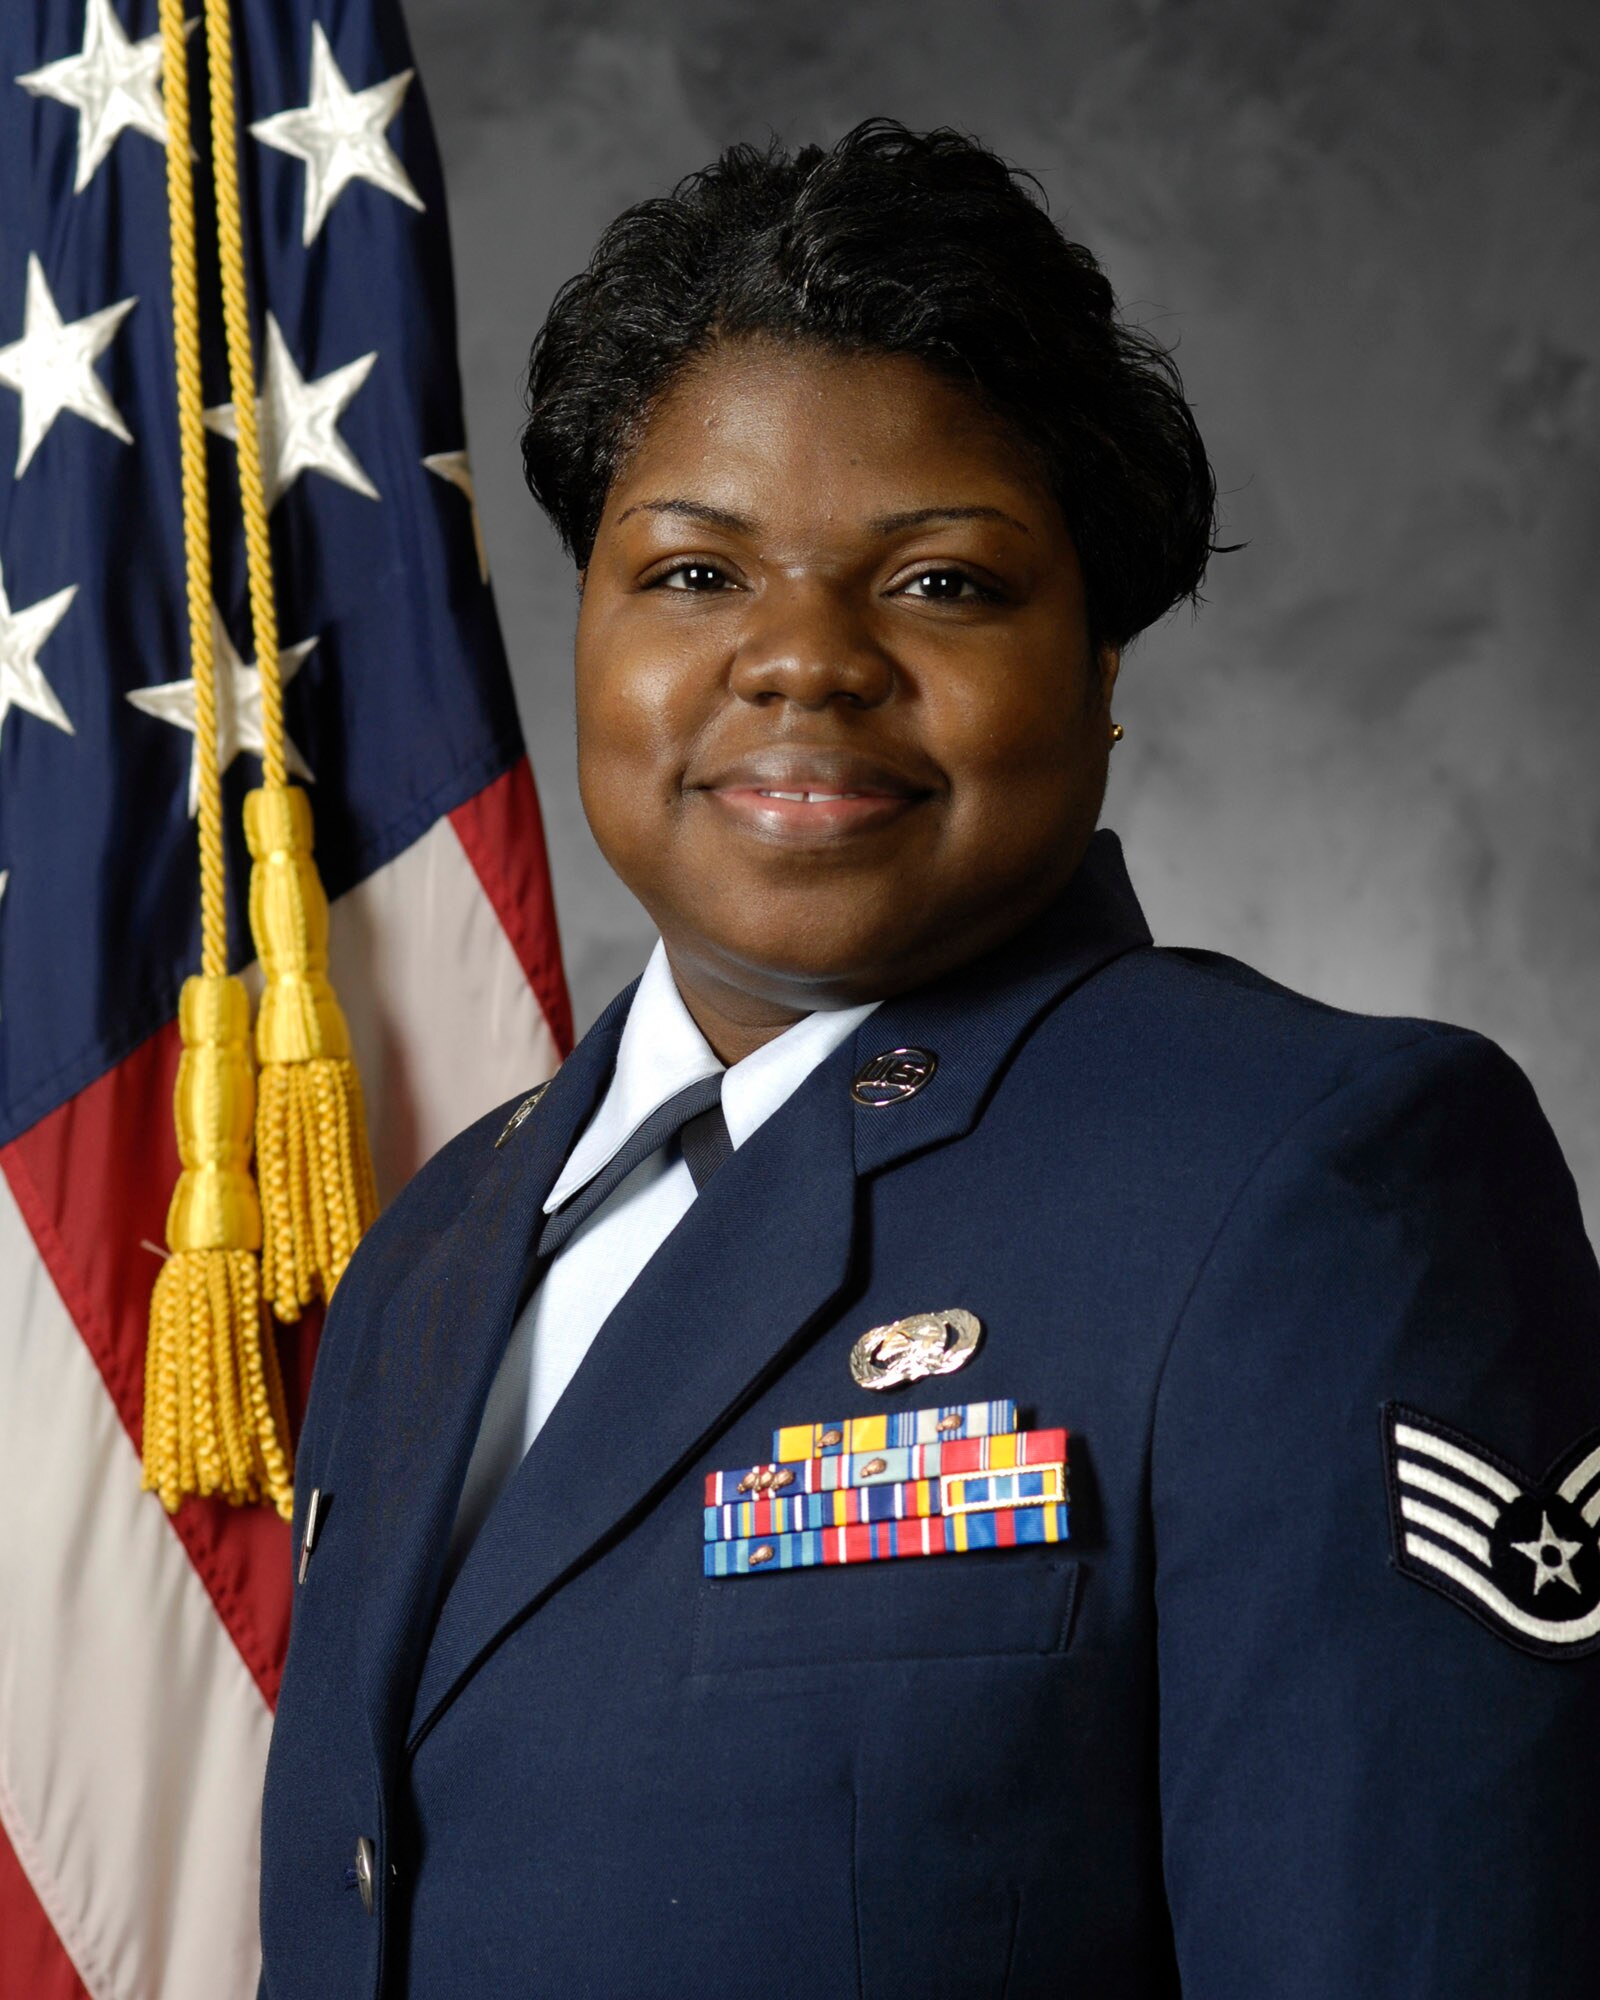 Staff Sgt. Carmen F. Hassell is the NCO In Charge for Supply for the United States Air Force Honor Guard. “She is a phenomenal NCO and accomplished professional,” Lt Col. Anthony Taylor, Honor Guard commander, wrote in her nomination package. As the unit resource advisor, she analyzed and managed a $900K budget. She also is responsible for $1.9 million in equipment and supplies, requisitioning 30K in assets with zero mission failures. She also spearheaded a two-year inventory backlog, maximizing storage space and exposing concealed assets, leading to a $150K Air Force savings. She is enrolled with University of Maryland College and completed six credits toward her bachelor’s degree in accounting. (U.S. Air Force photo by Senior Airman Sean Adams)